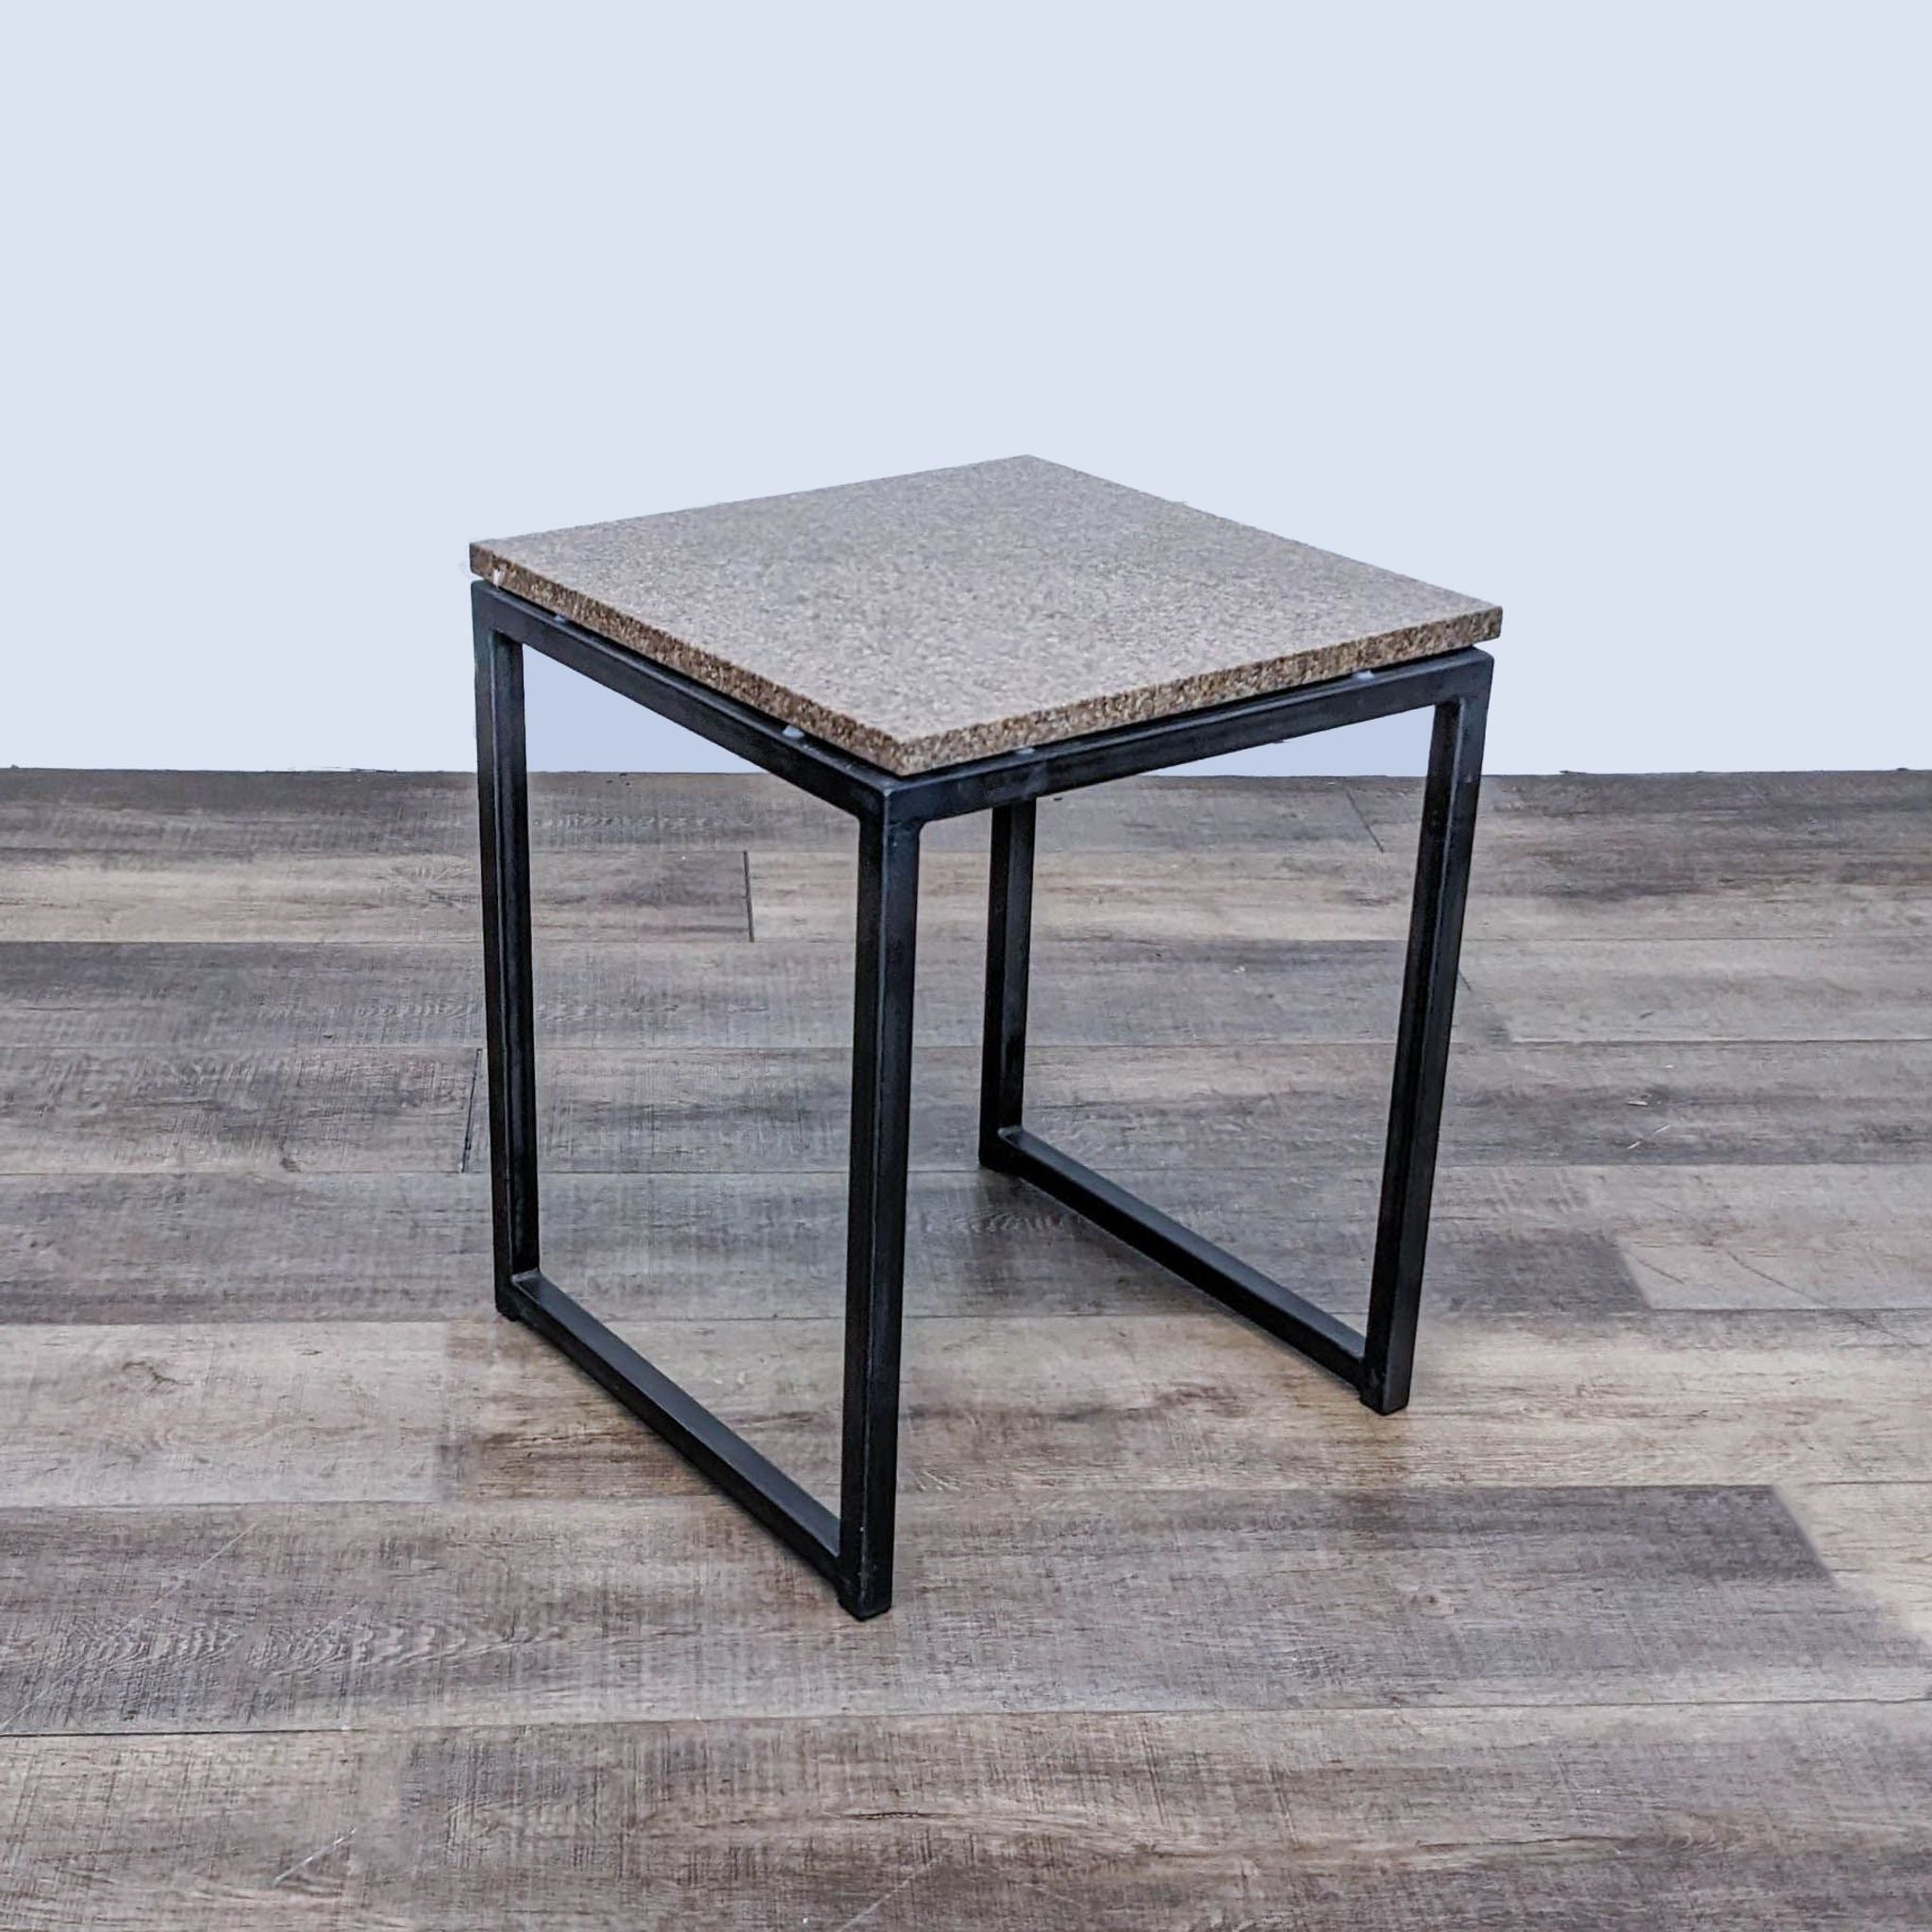 Angled view of Room & Board console table, featuring metal legs and textured top, on a hardwood floor.